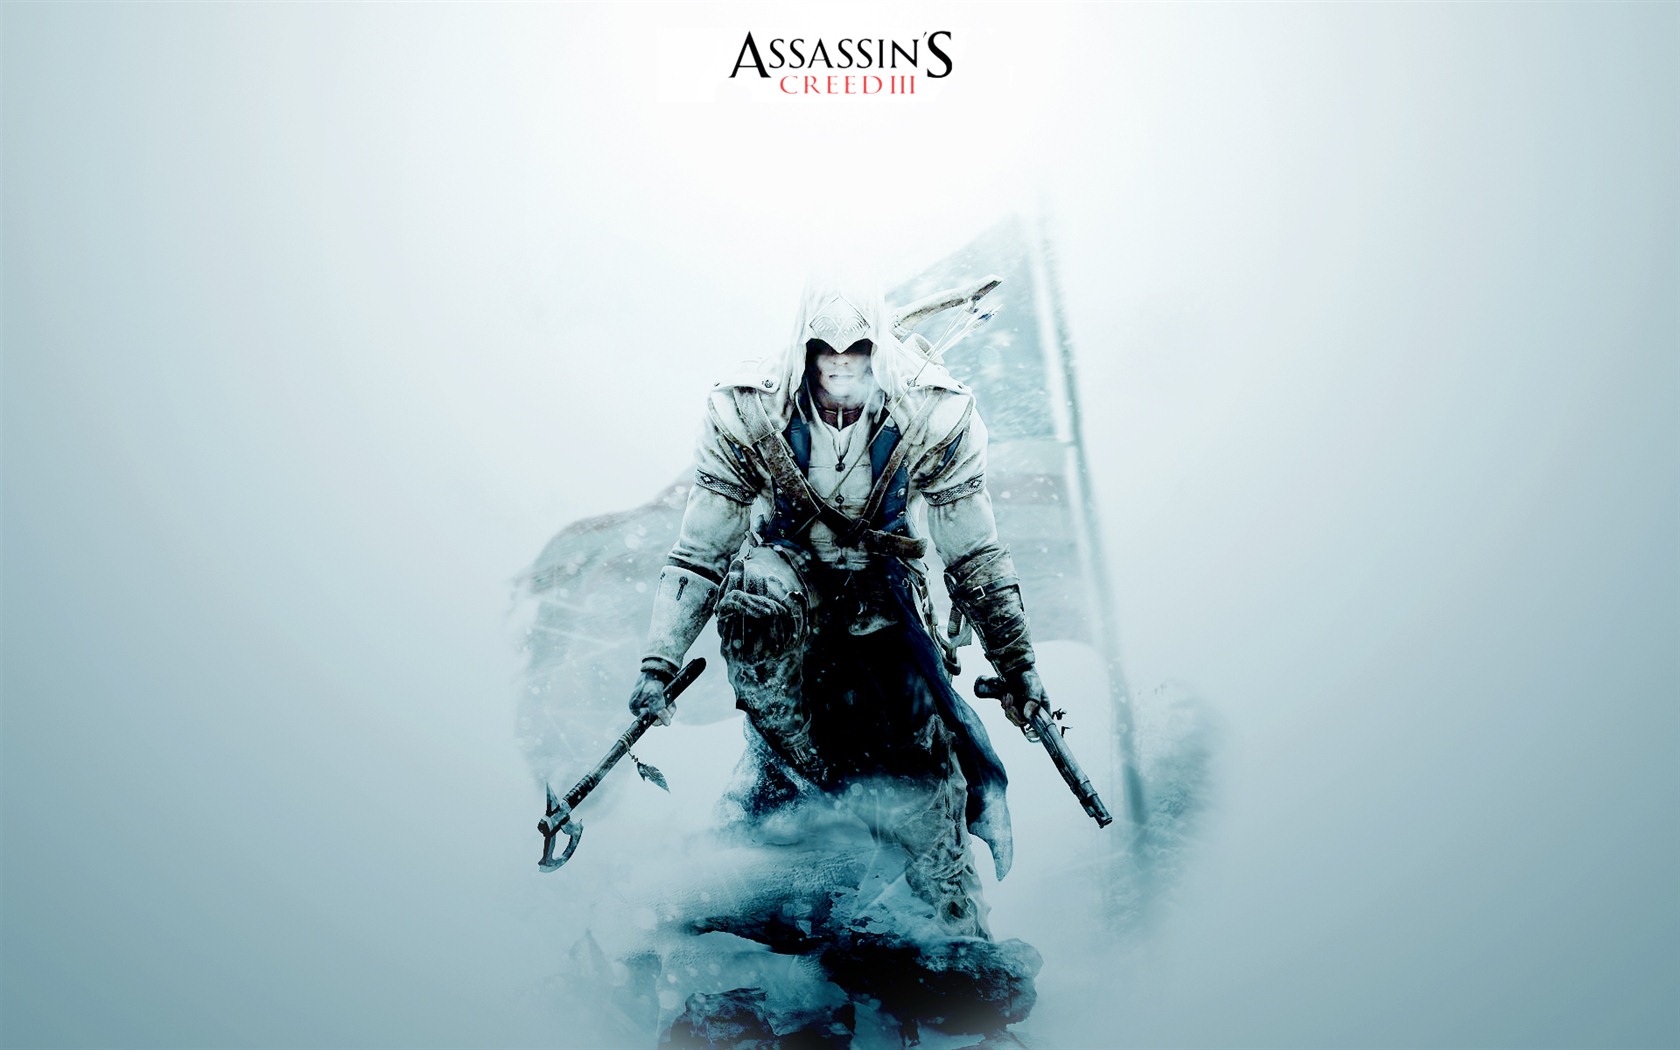 Assassin's Creed 3 HD wallpapers #11 - 1680x1050